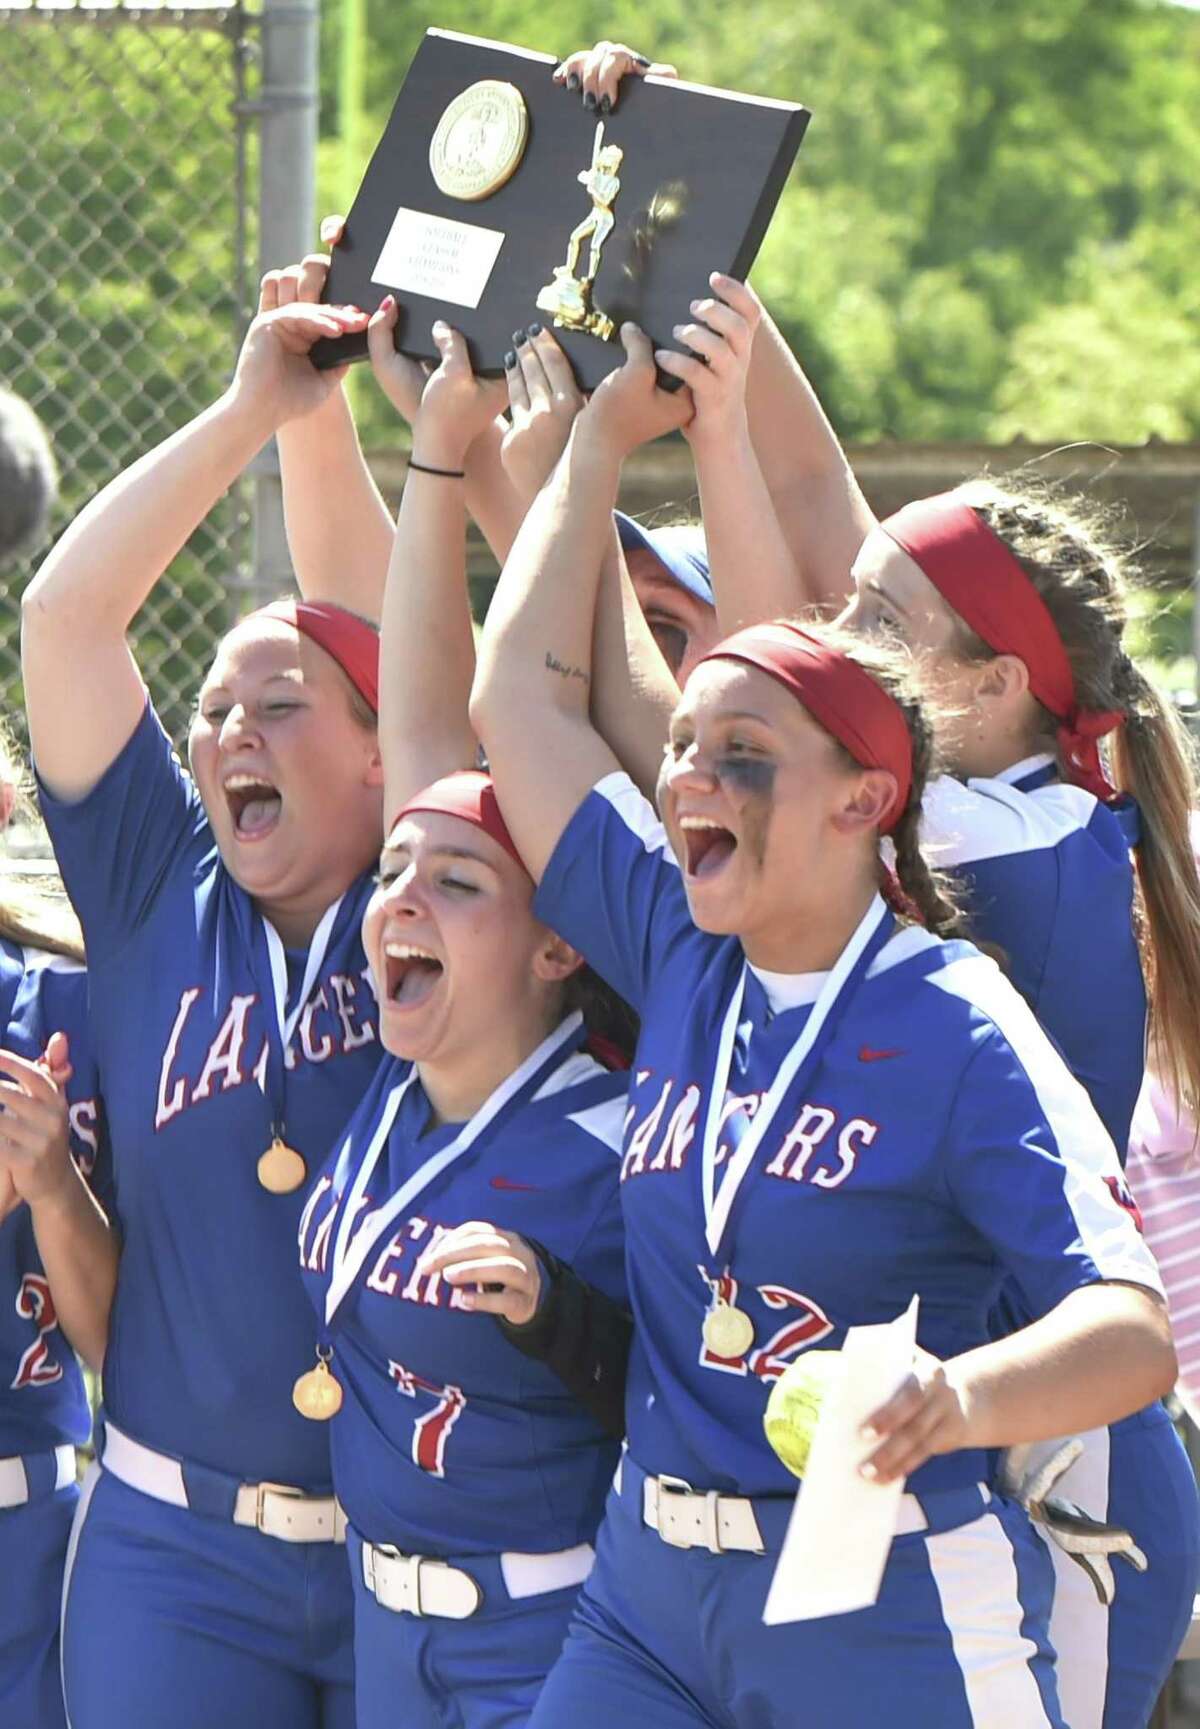 West Haven, Connecticut - Friday, June 7, 2019: Class M State Championship softball game between Seymour H.S. and Waterford H.S. Saturday afternoon at West Haven H.S.'s Biondi Field in West Haven. Waterford H.S. defeated Seymour H.S. 6-5.